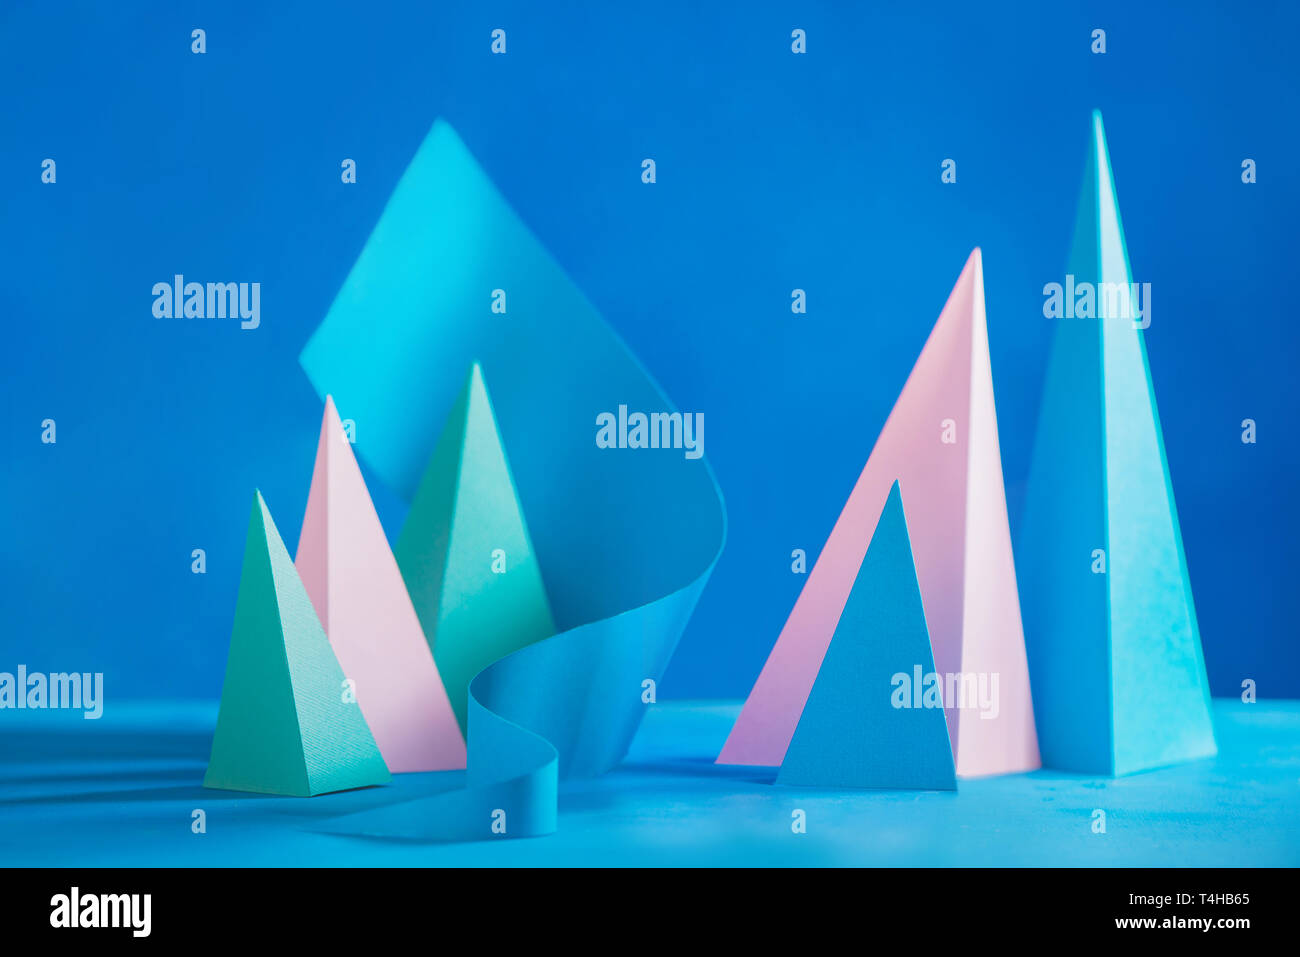 Abstract pastel tone header. Origami papercraft sculpture in pastel tones. Vibrant design template with modern shapes and copy space Stock Photo